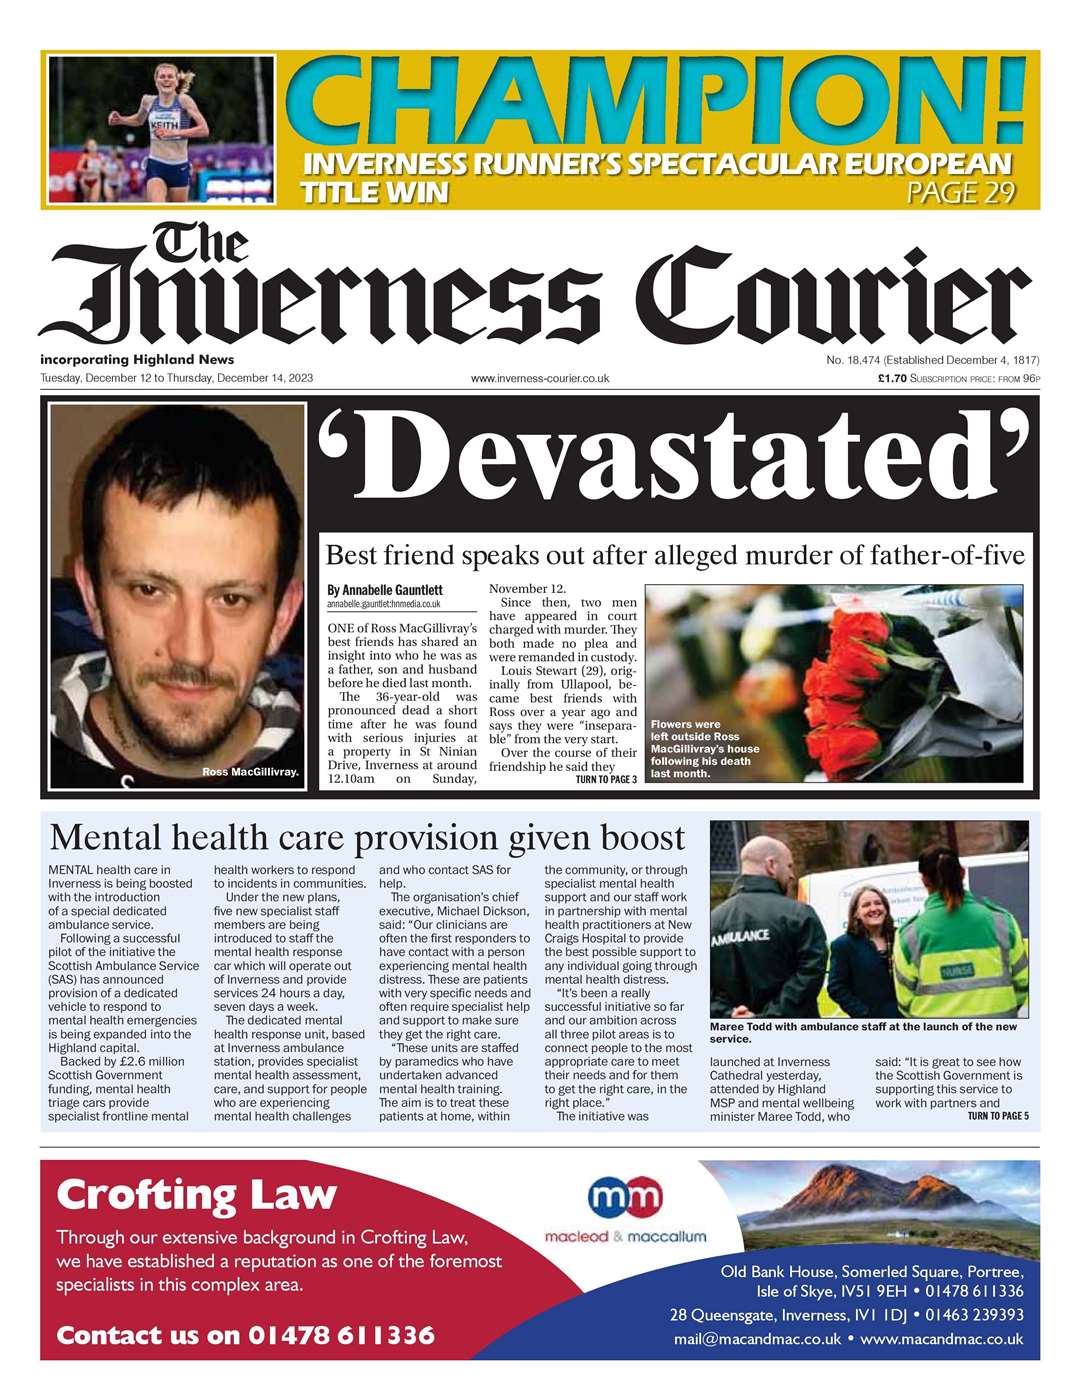 The Inverness Courier, December 12, front page.